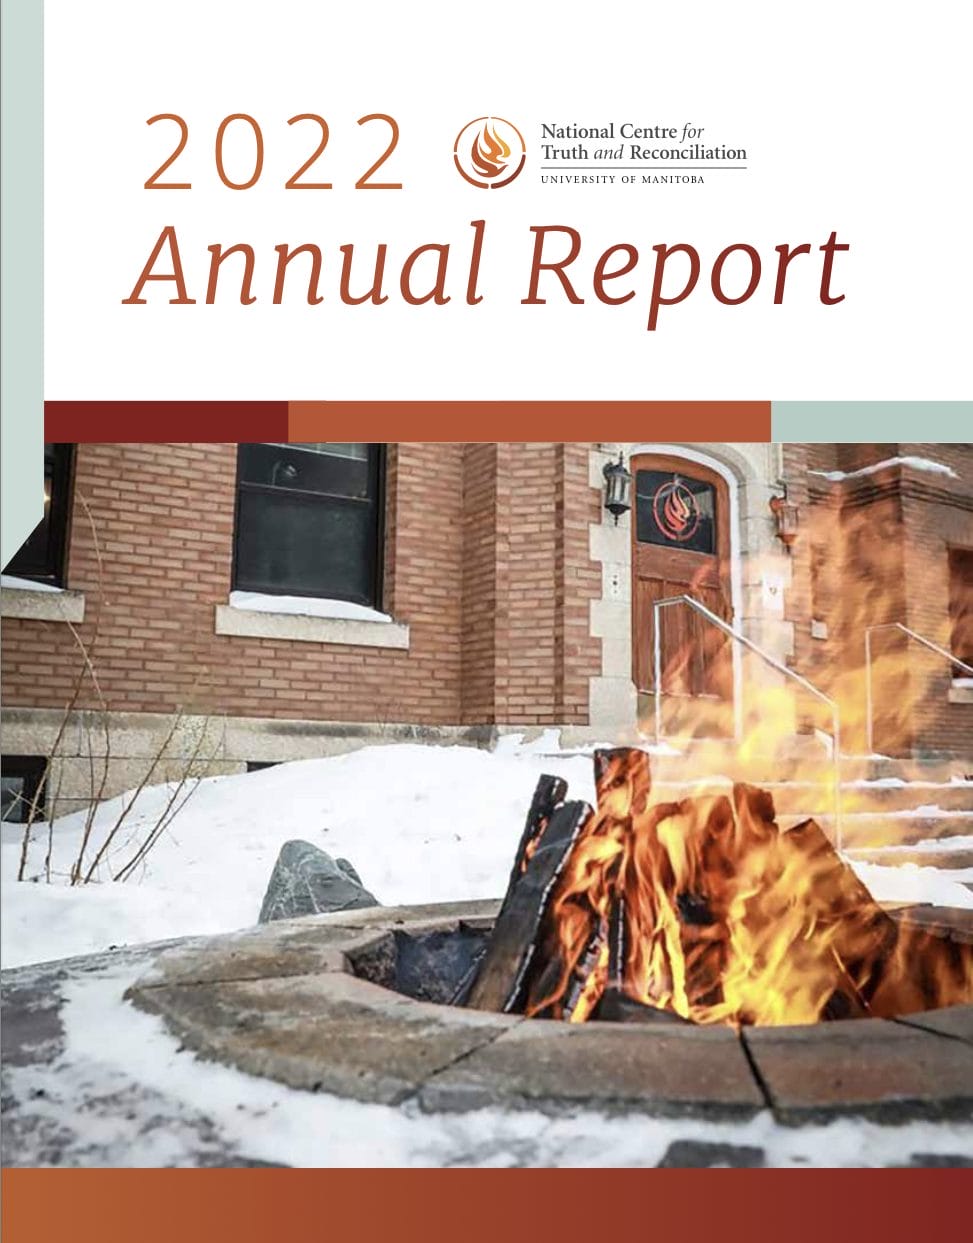 The 2022 NCTR Annual Report